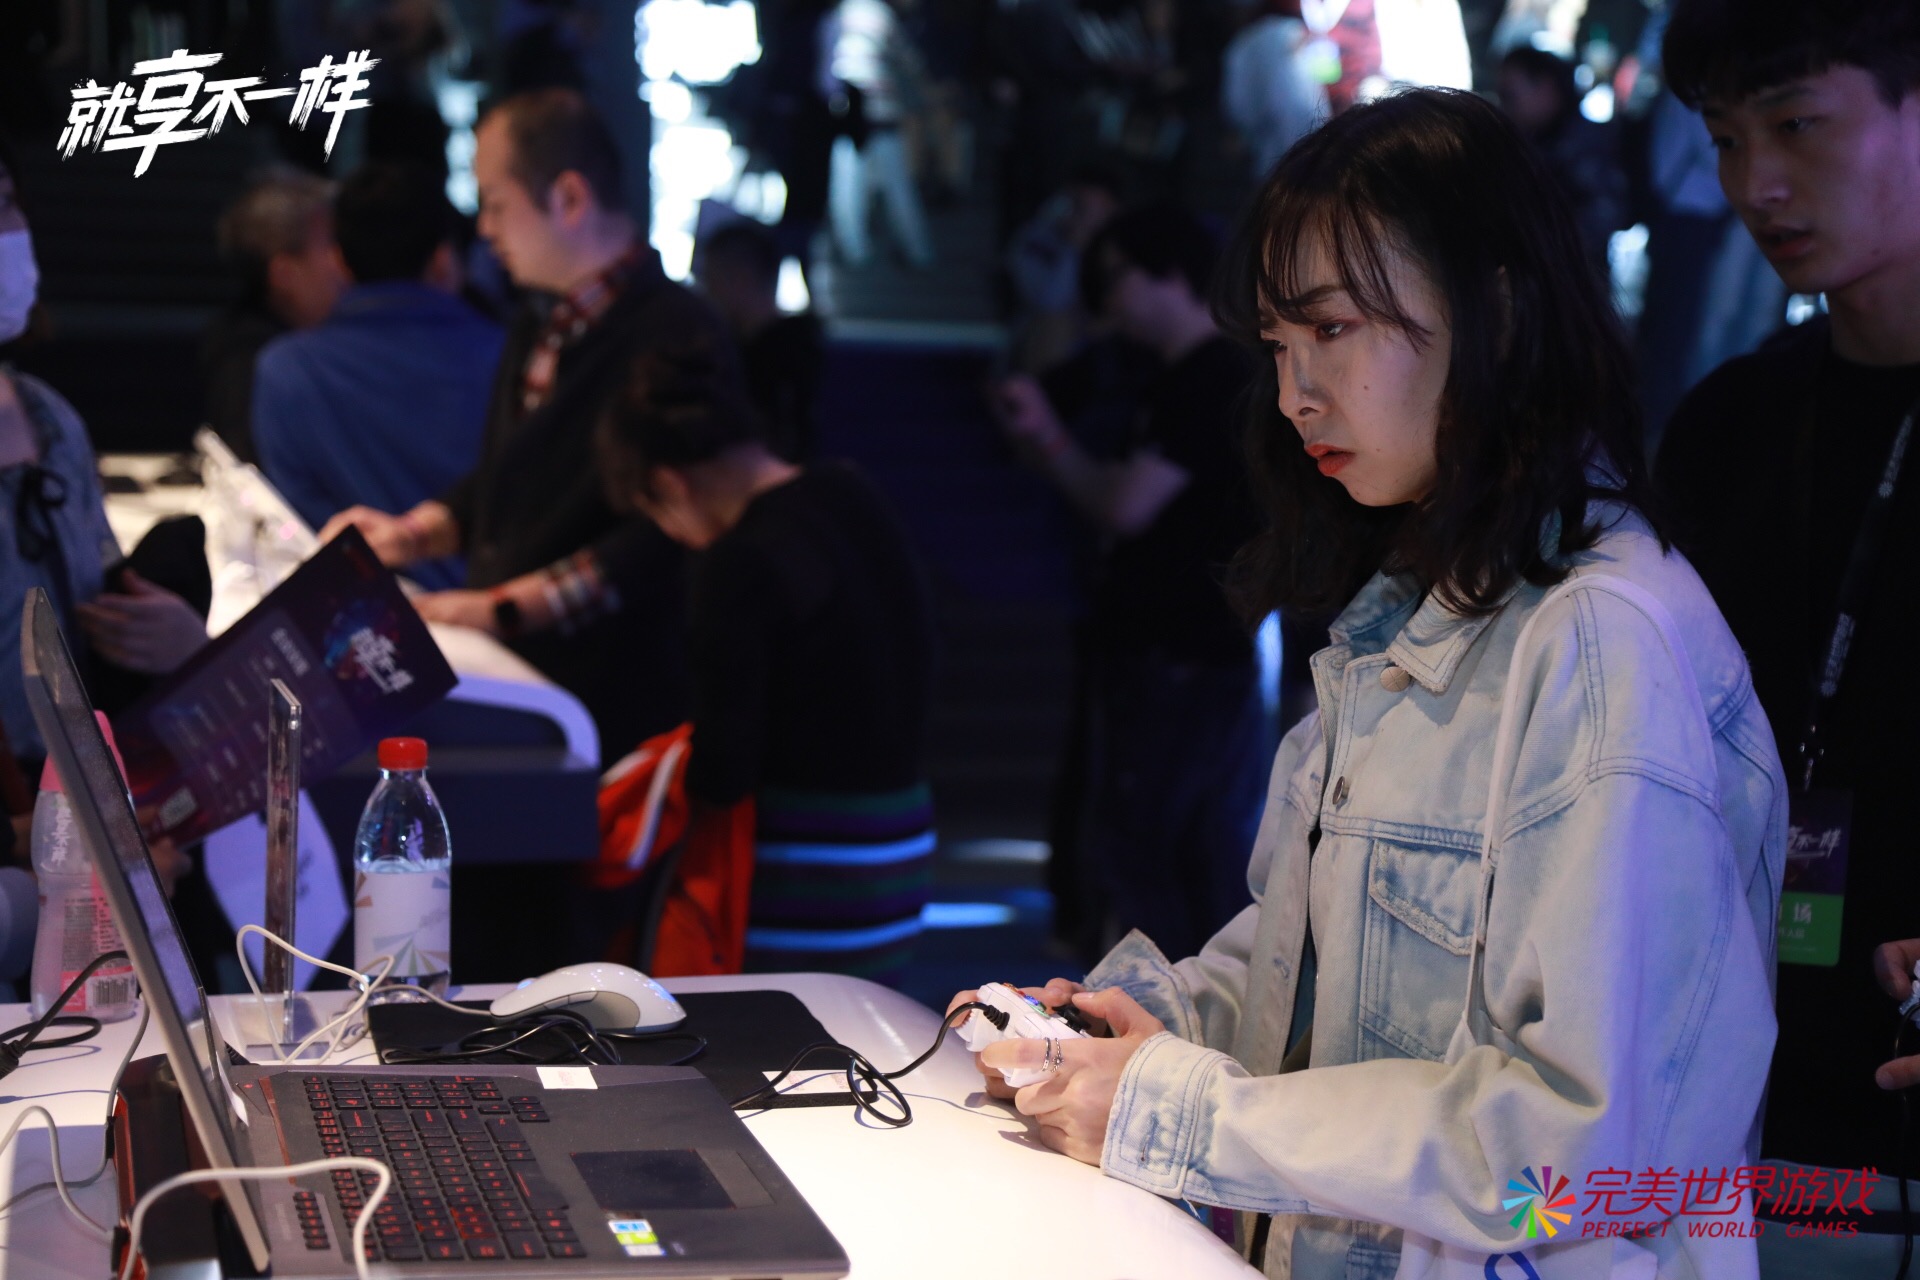 A woman plays a PC game in an experience center on March 27 in Beijing. [Photo courtesy of Perfect World]